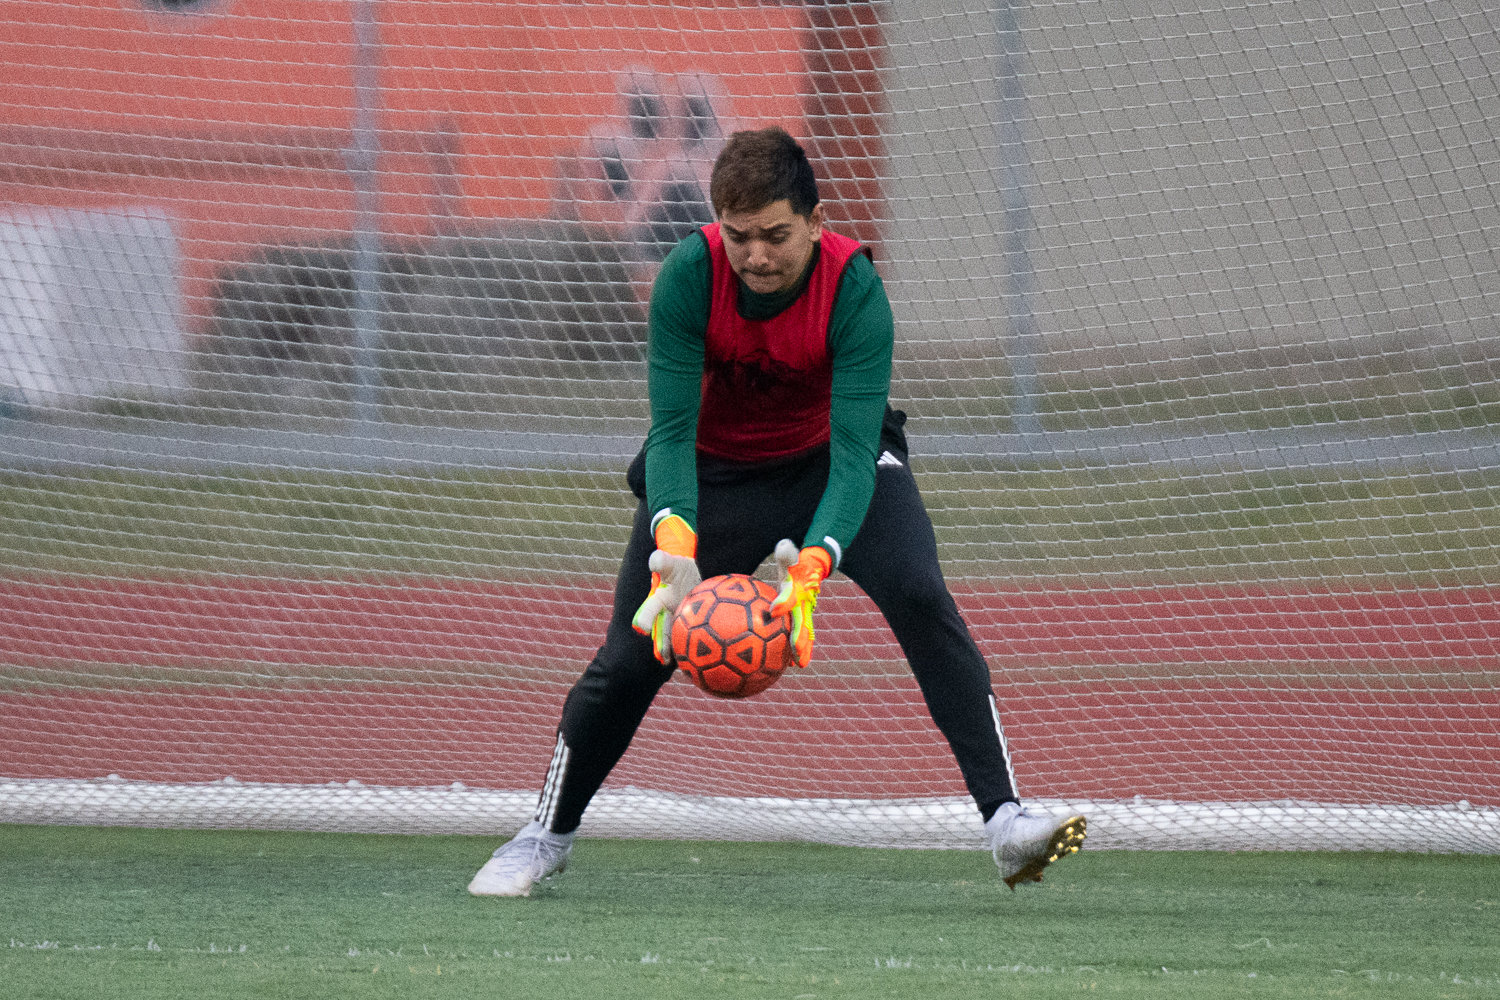 Centralia keeper Carlos Hernandez makes a save during the first half of the Tigers' match against Rochester on March 17.